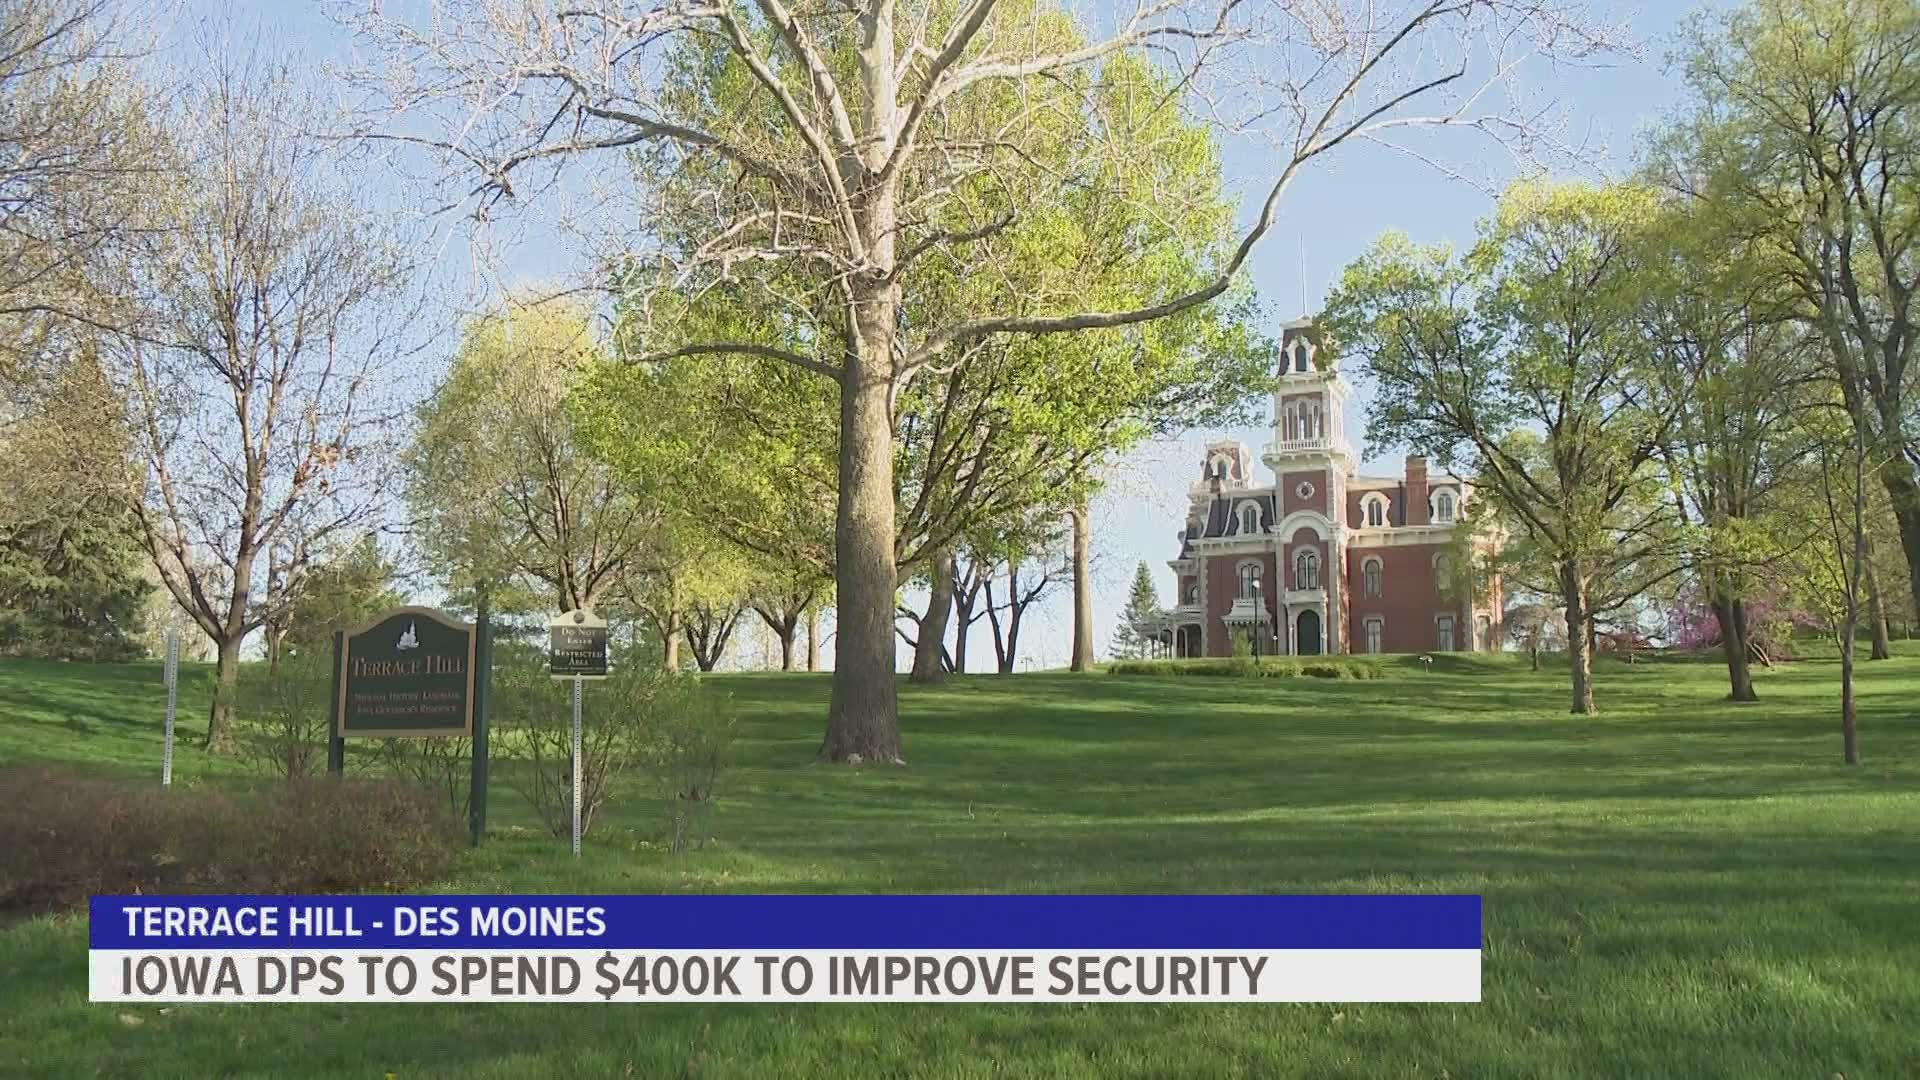 Iowa Department of Public Safety officials say the cost of the fence to be installed soon around the Terrace Hill property will come from the DPS budget.